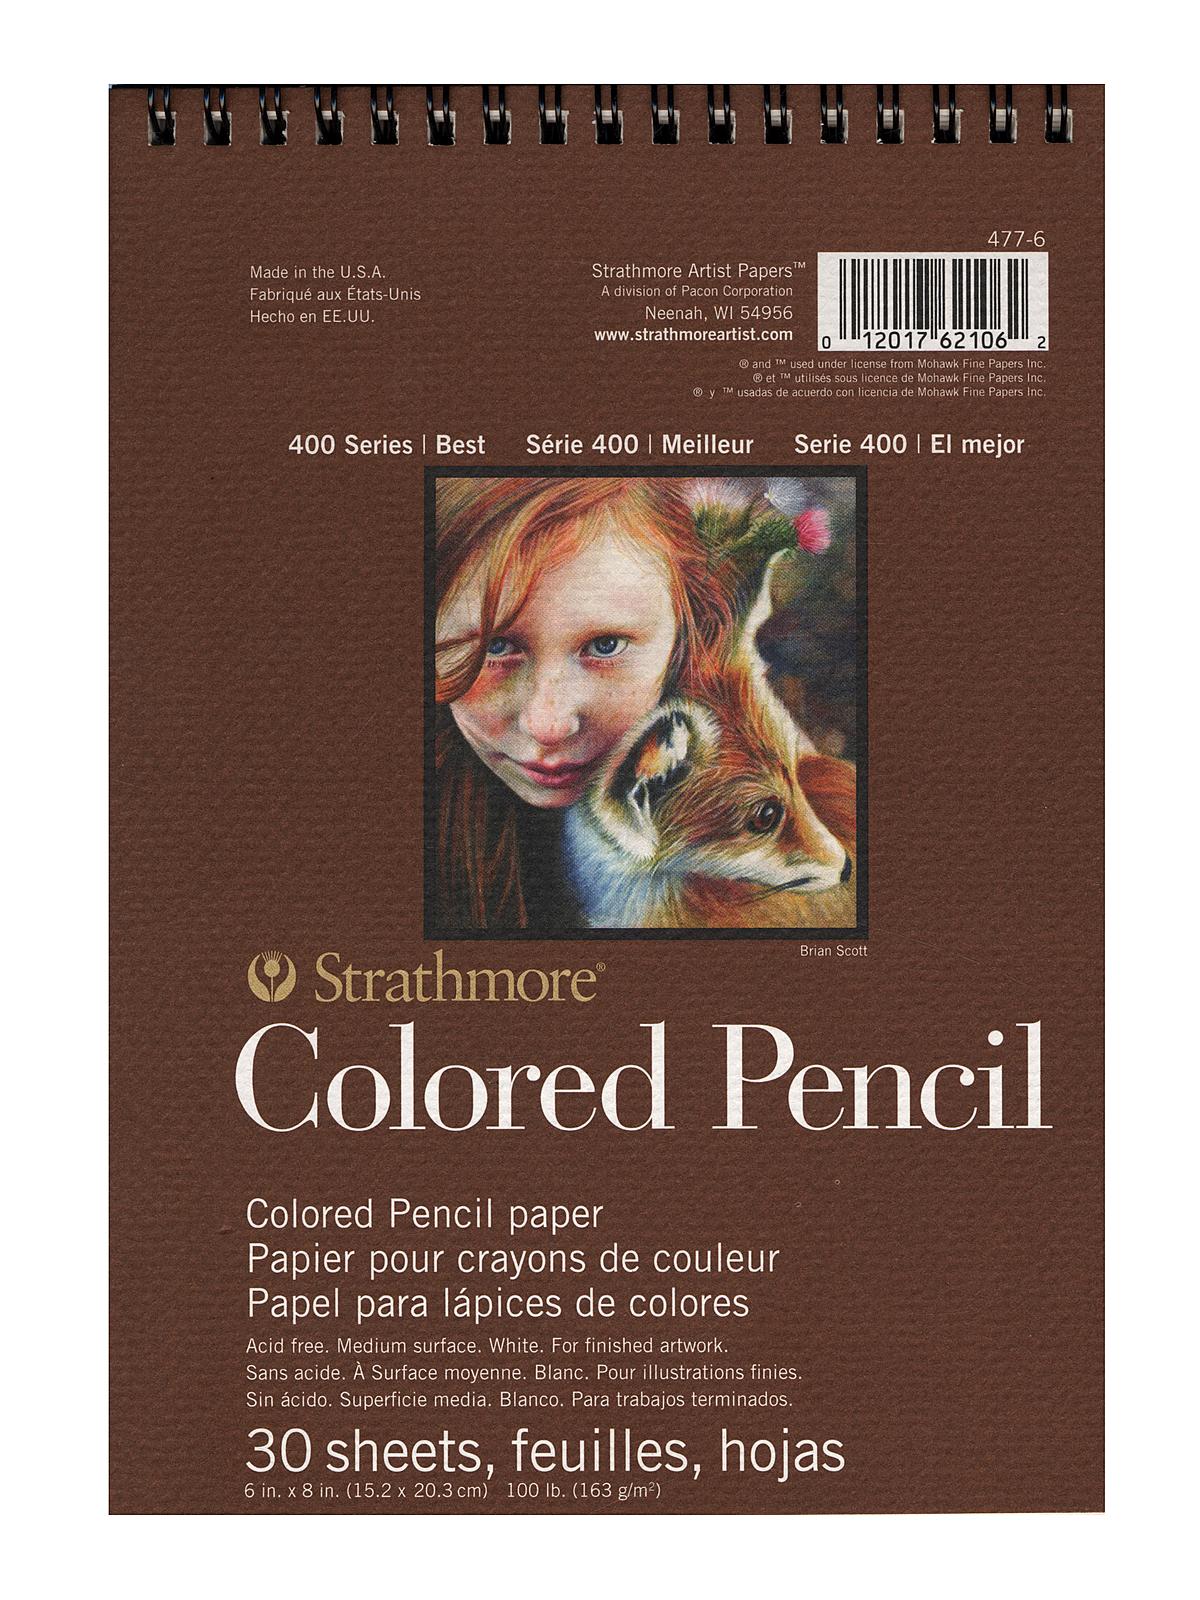 400 Series Colored Pencil Pad 6 In. X 8 In. 30 Sheets